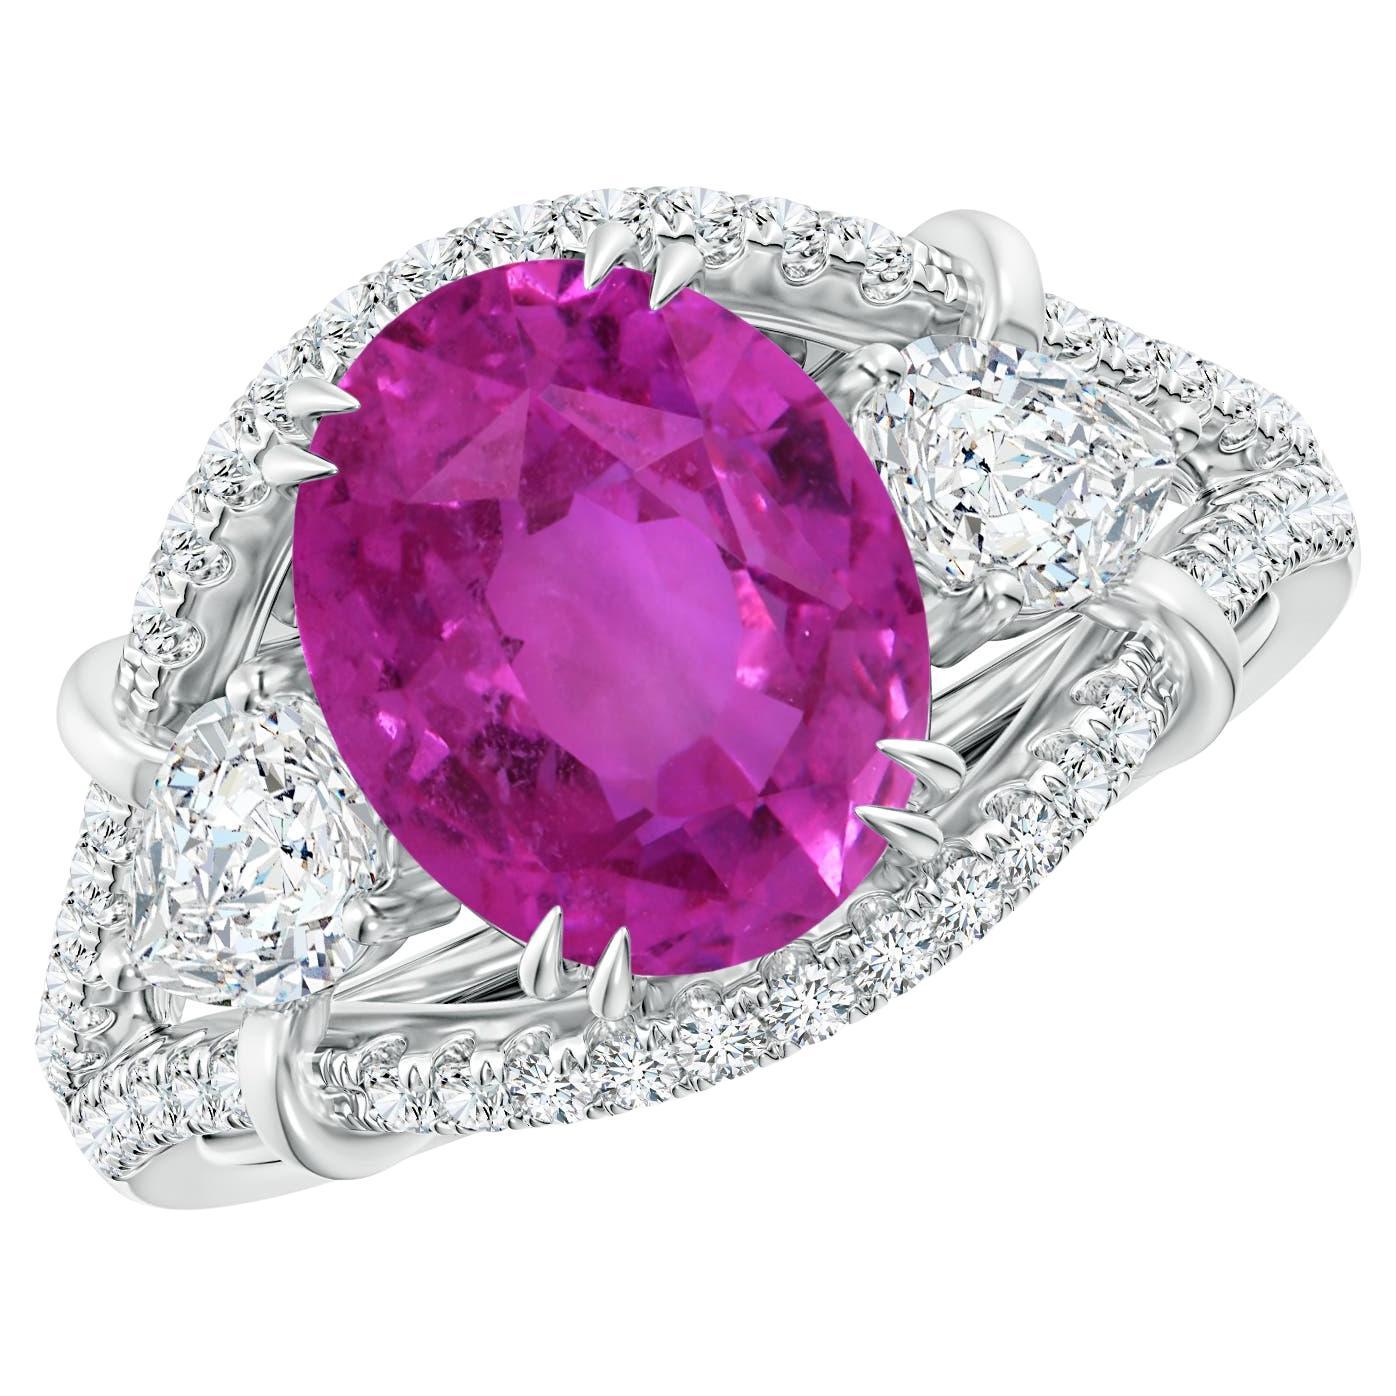 For Sale:  Angara GIA Certified Natural Pink Sapphire Ring in White Gold with Diamonds